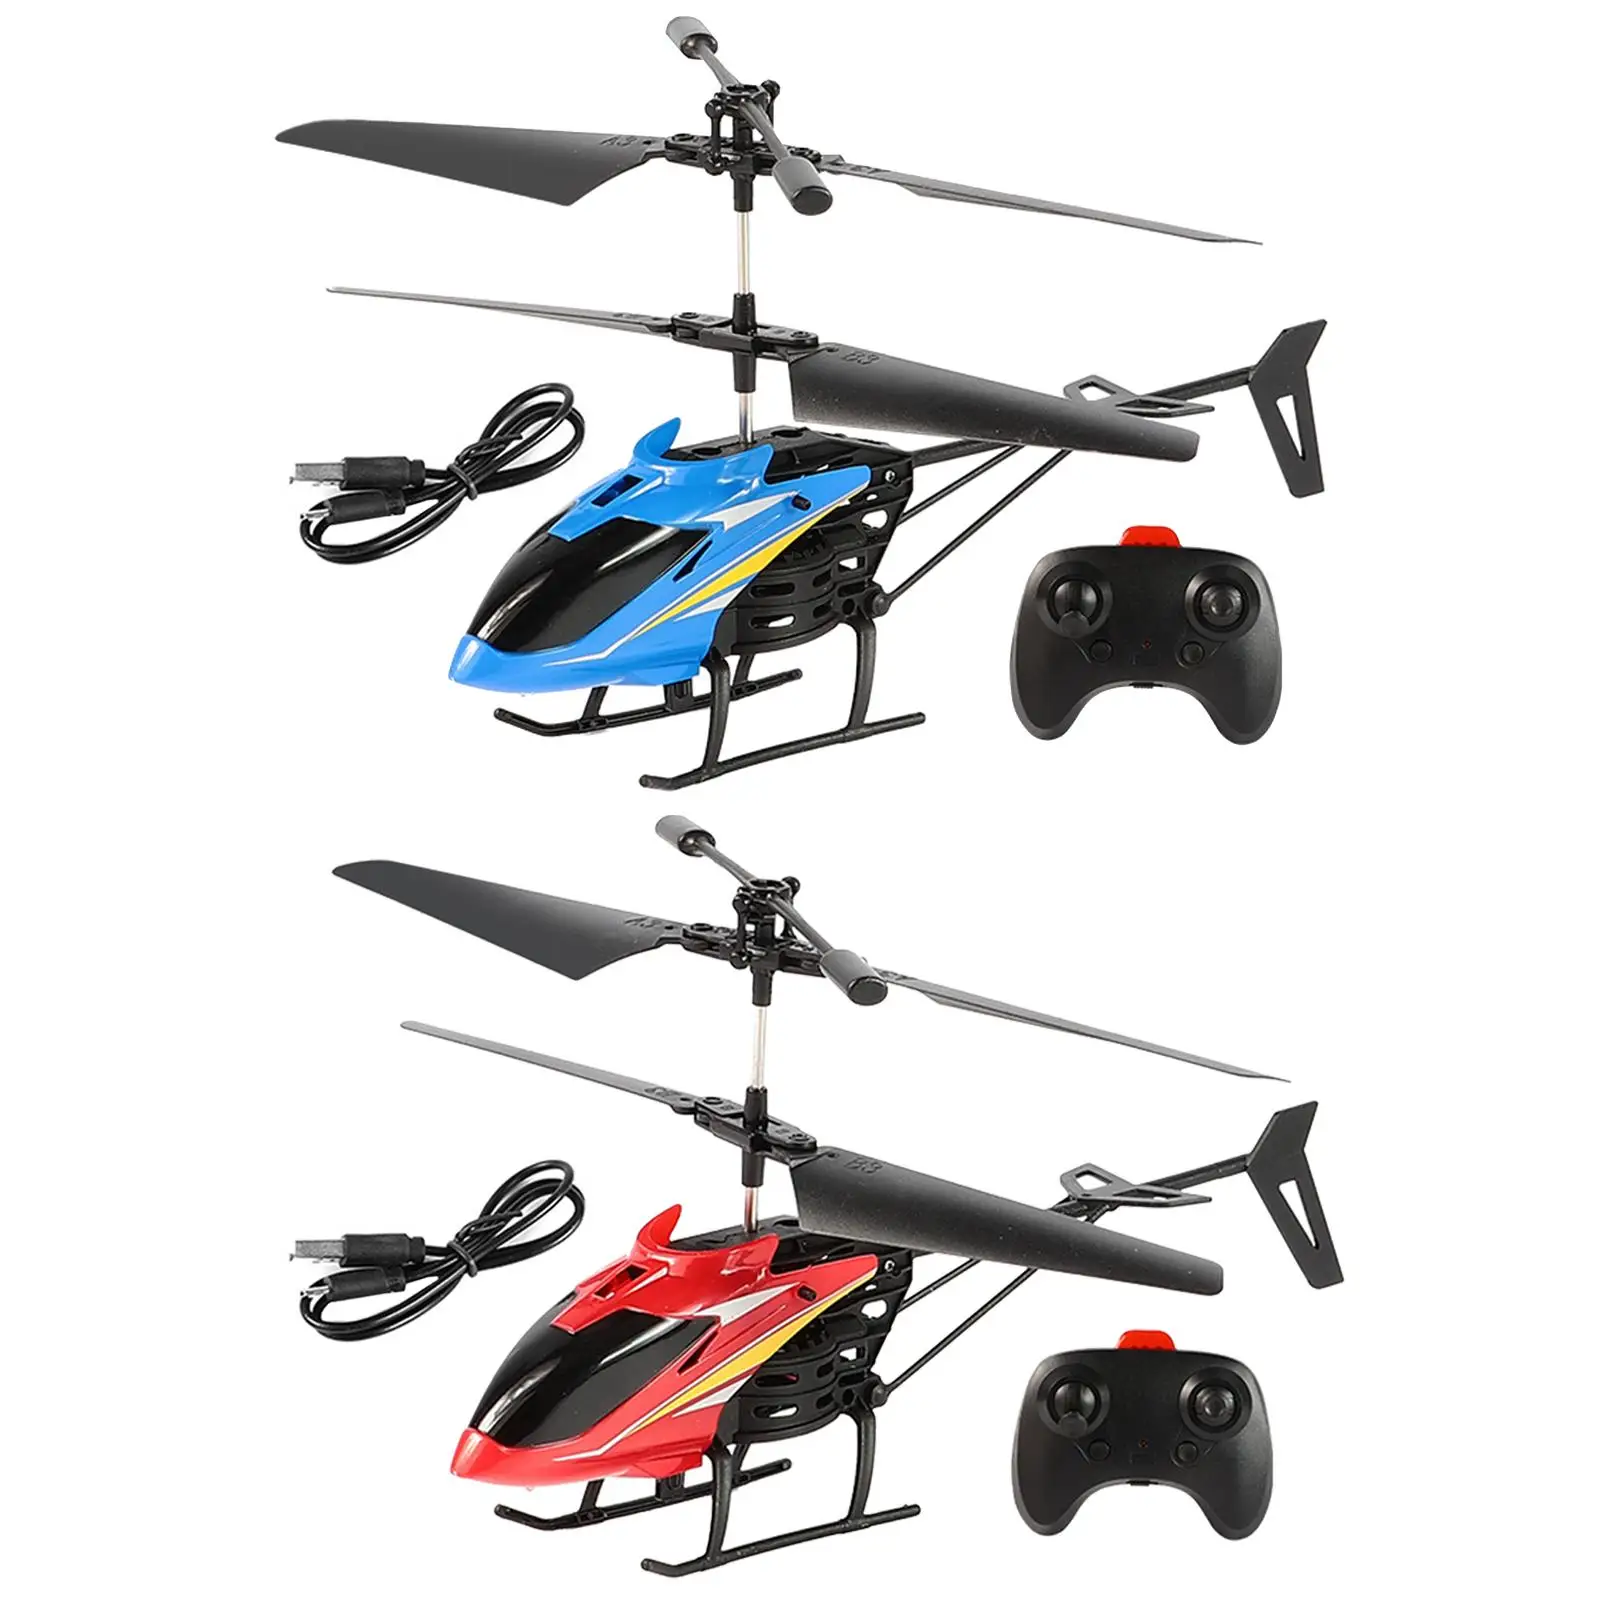 

RC Helicopters LED Light 2.4GHz Altitude Hold One Key Take Off/Landing and Gyro Remote Control Helicopter for Adults Kids Boys